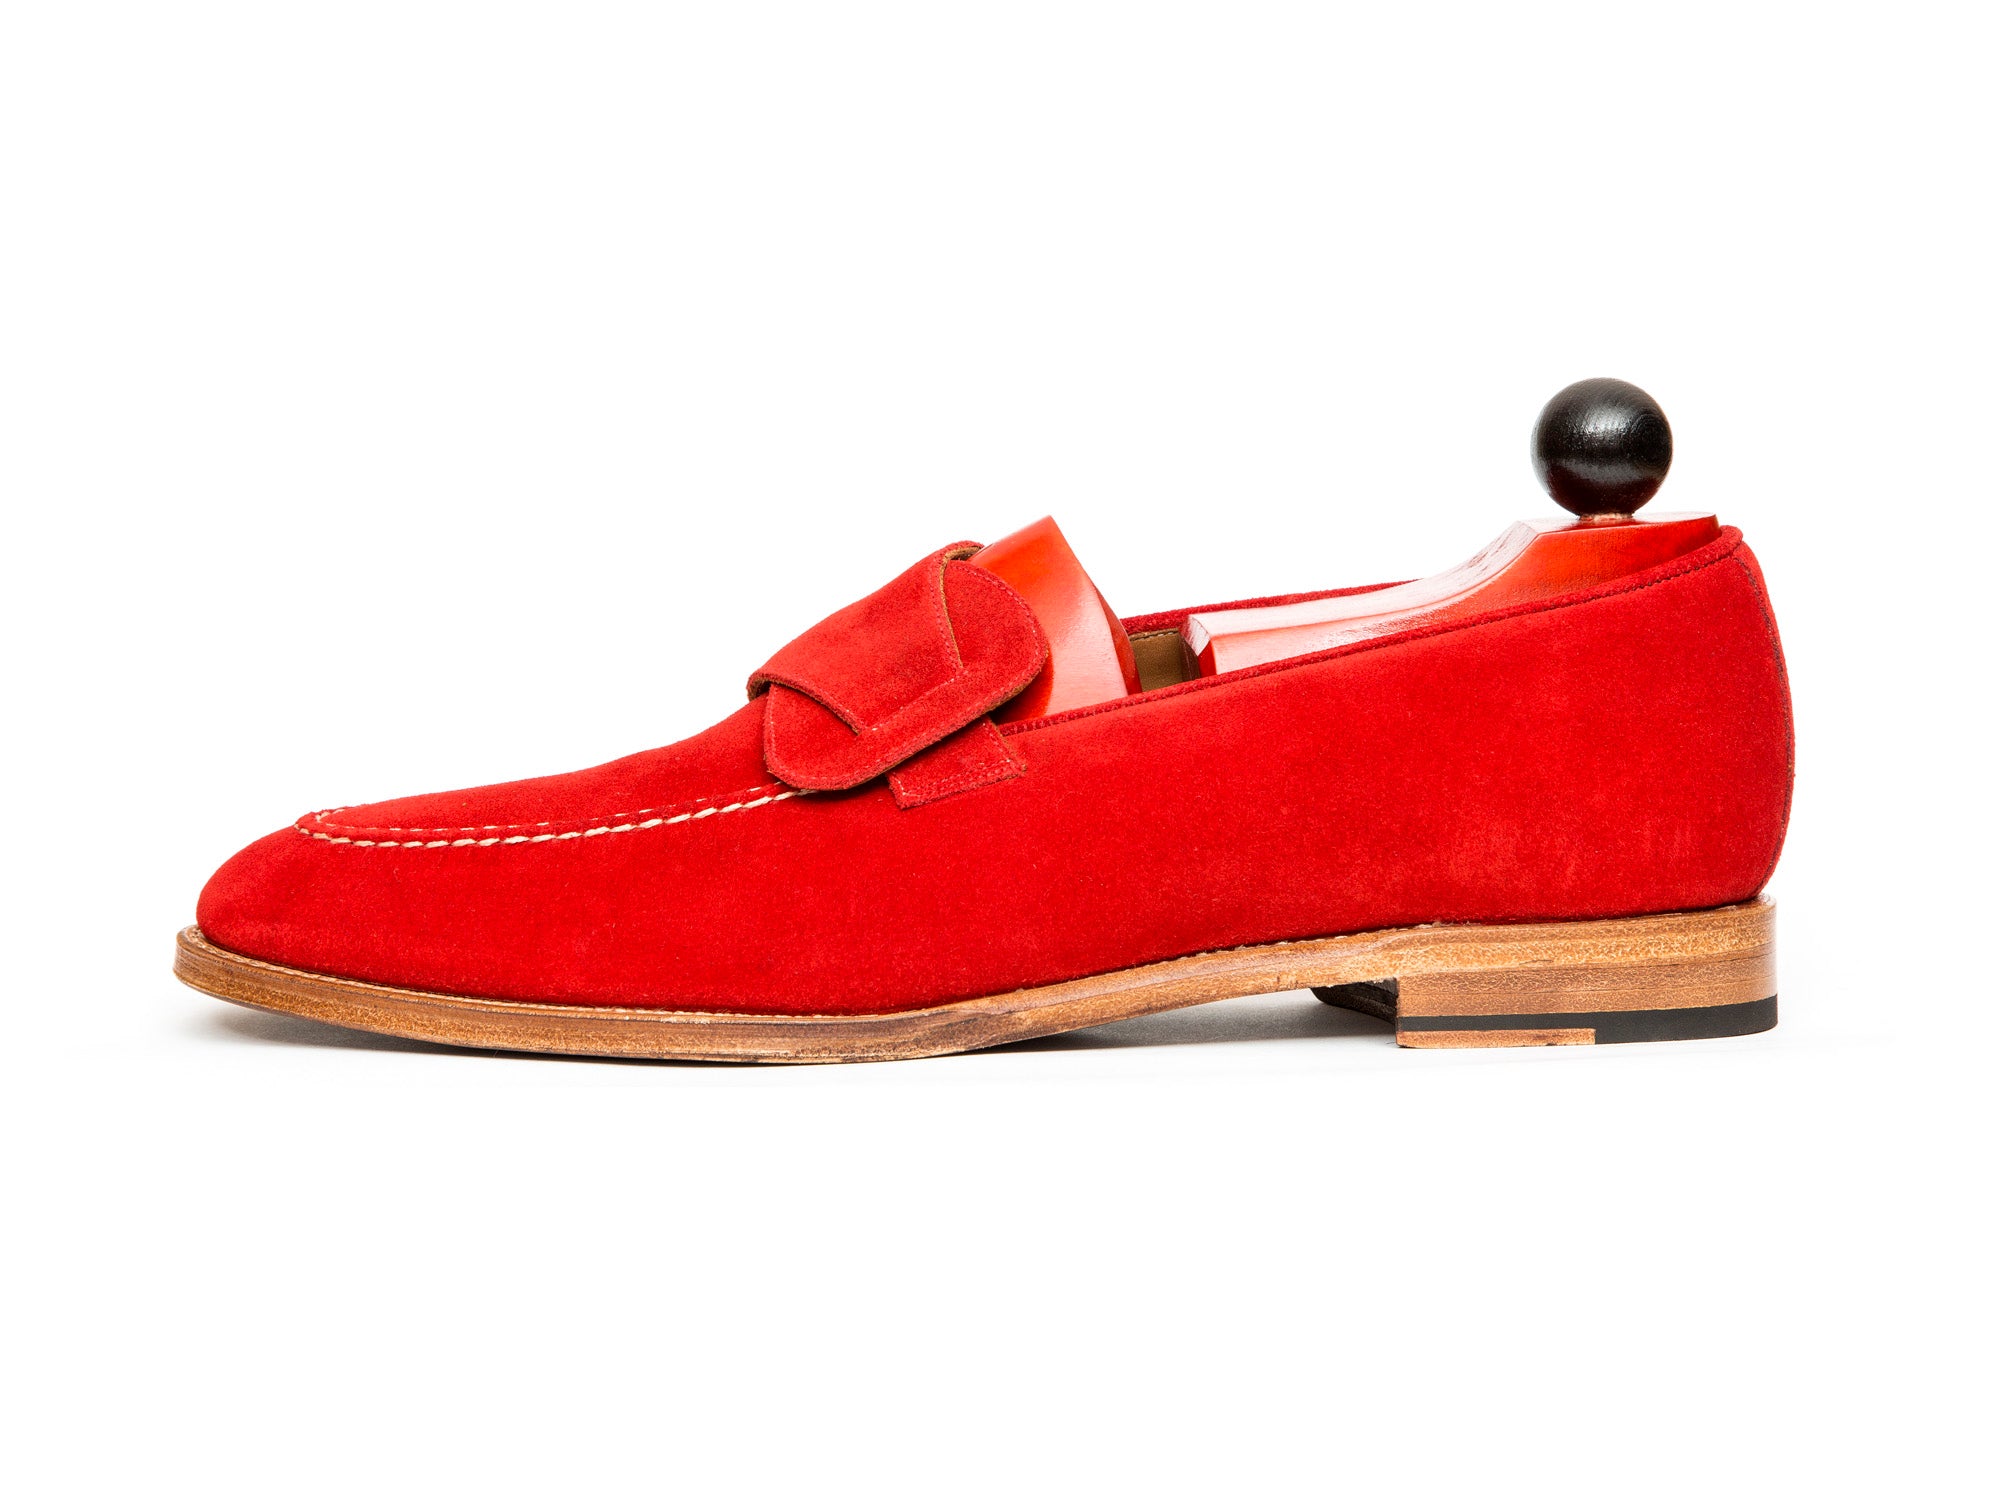 Hawthorne - MTO - Red Suede - TMG Last - Natural Single Leather Sole